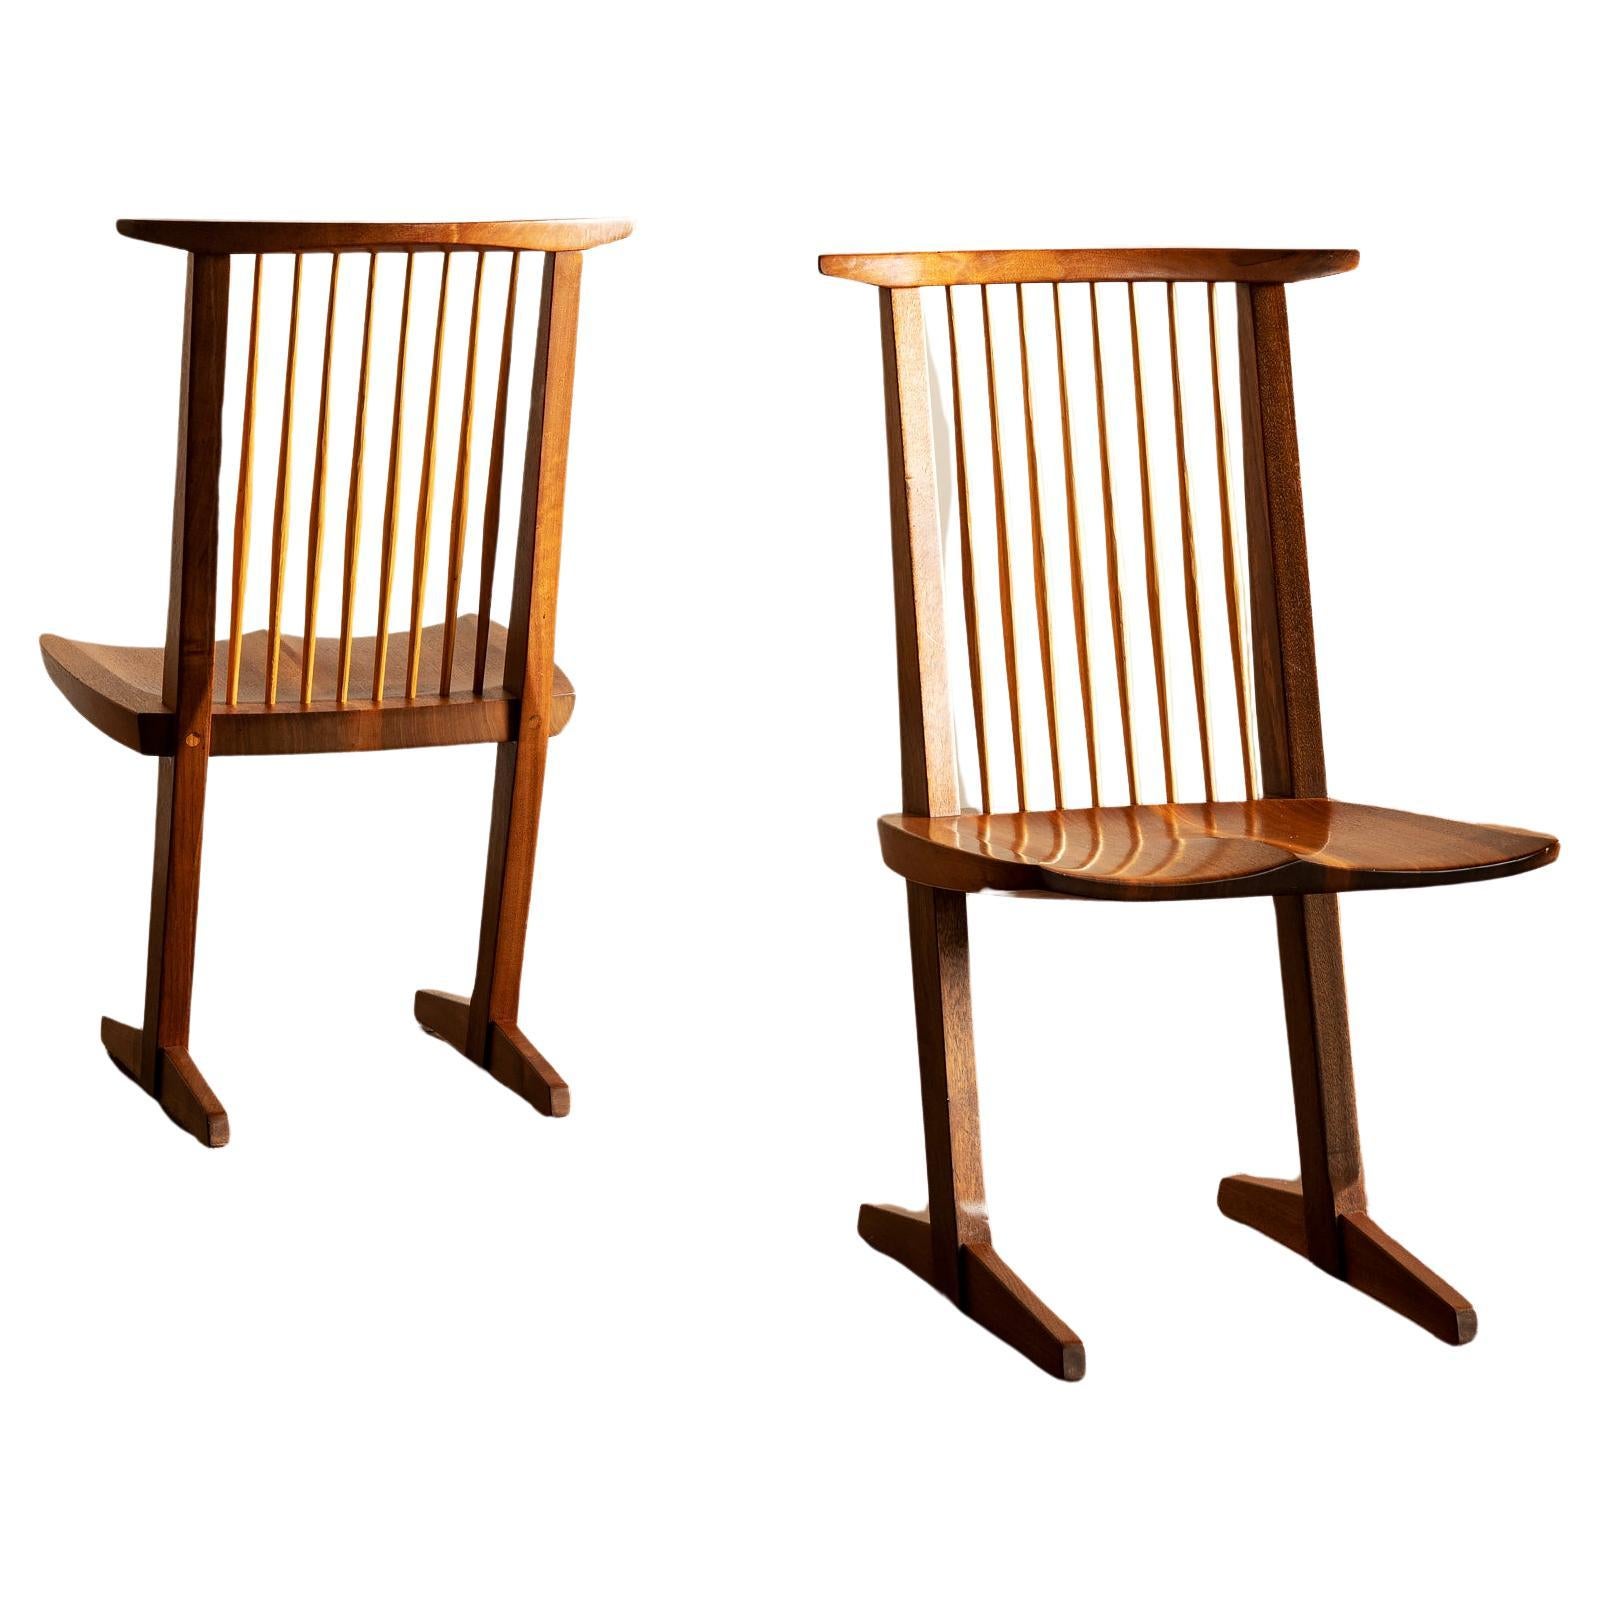 Pair of Conoid Chairs by George Nakashima, 1982 For Sale